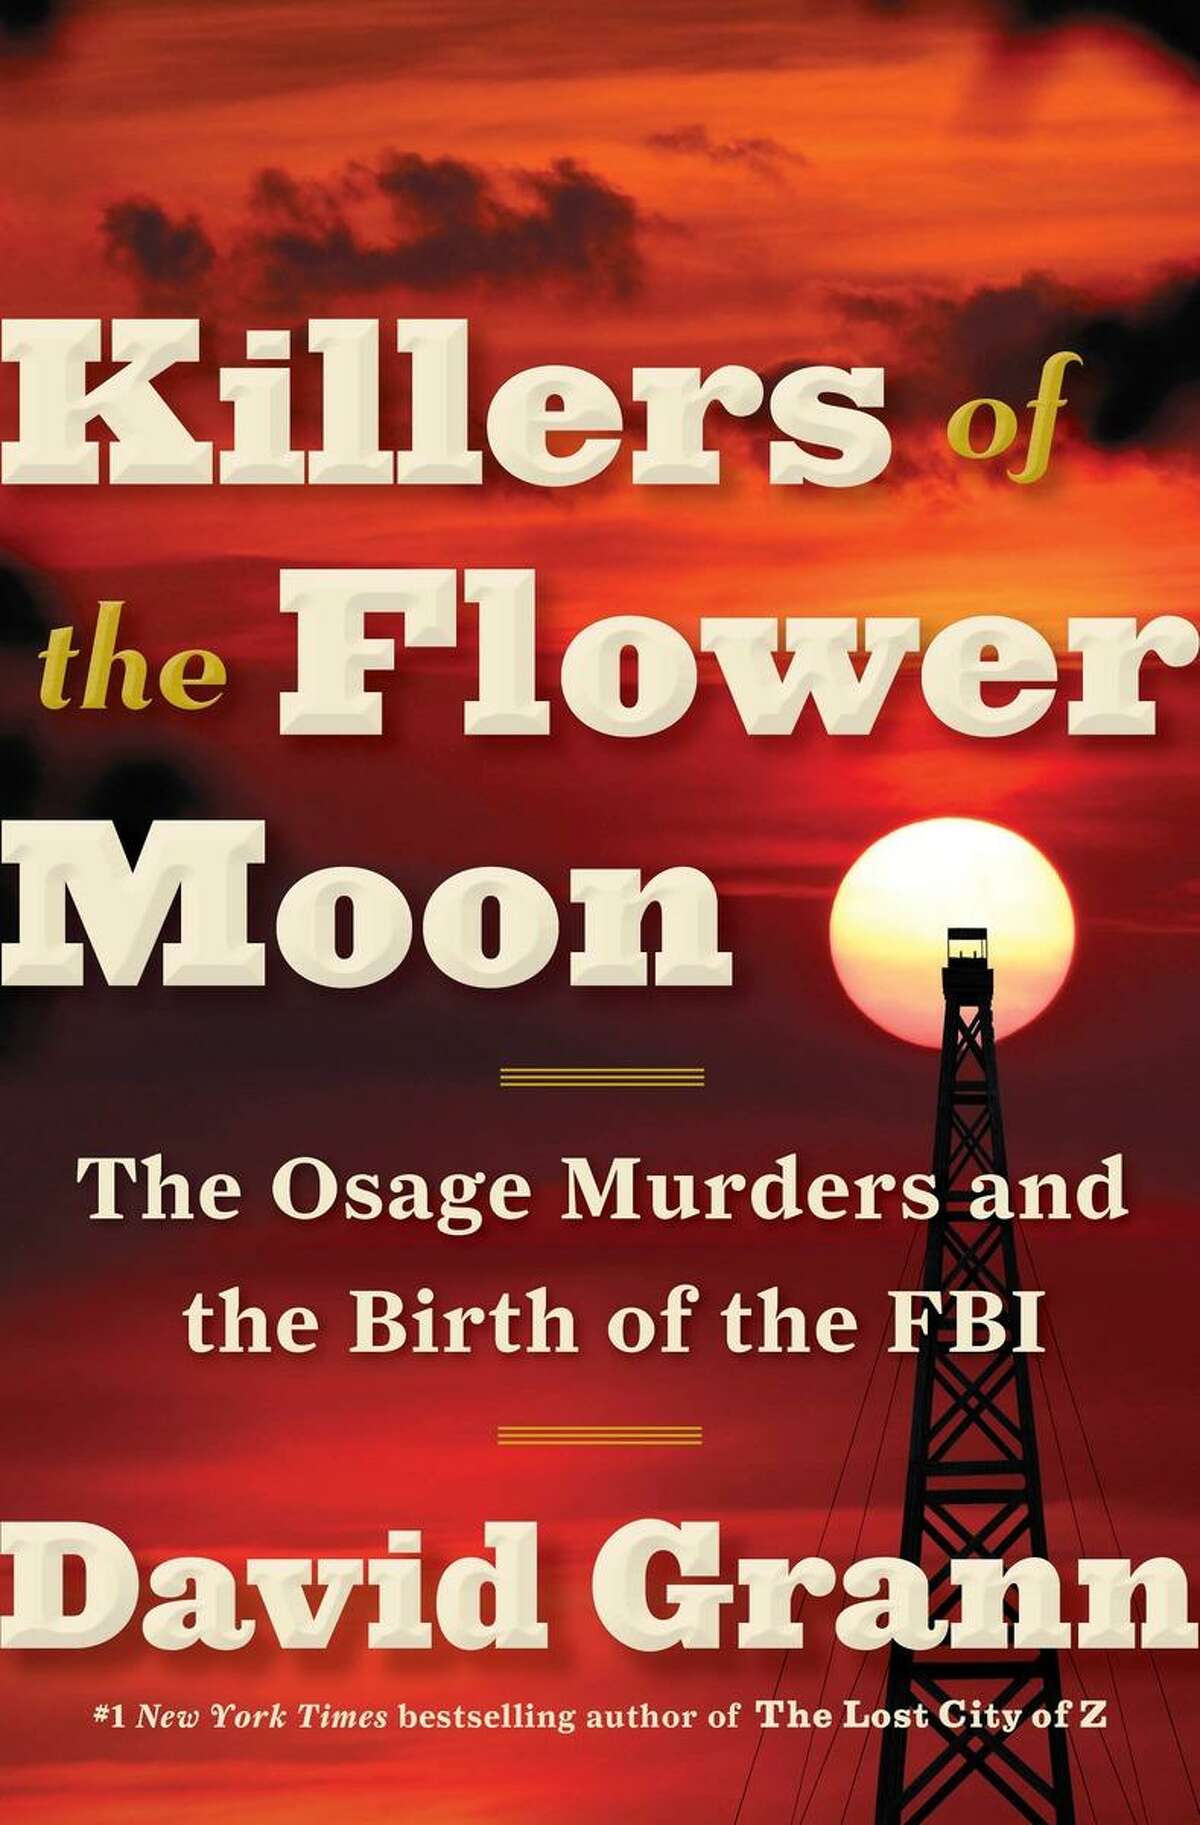 ‘Killers of the Flower Moon: The Osage Murders and the Birth of the FBI’ by David Grann